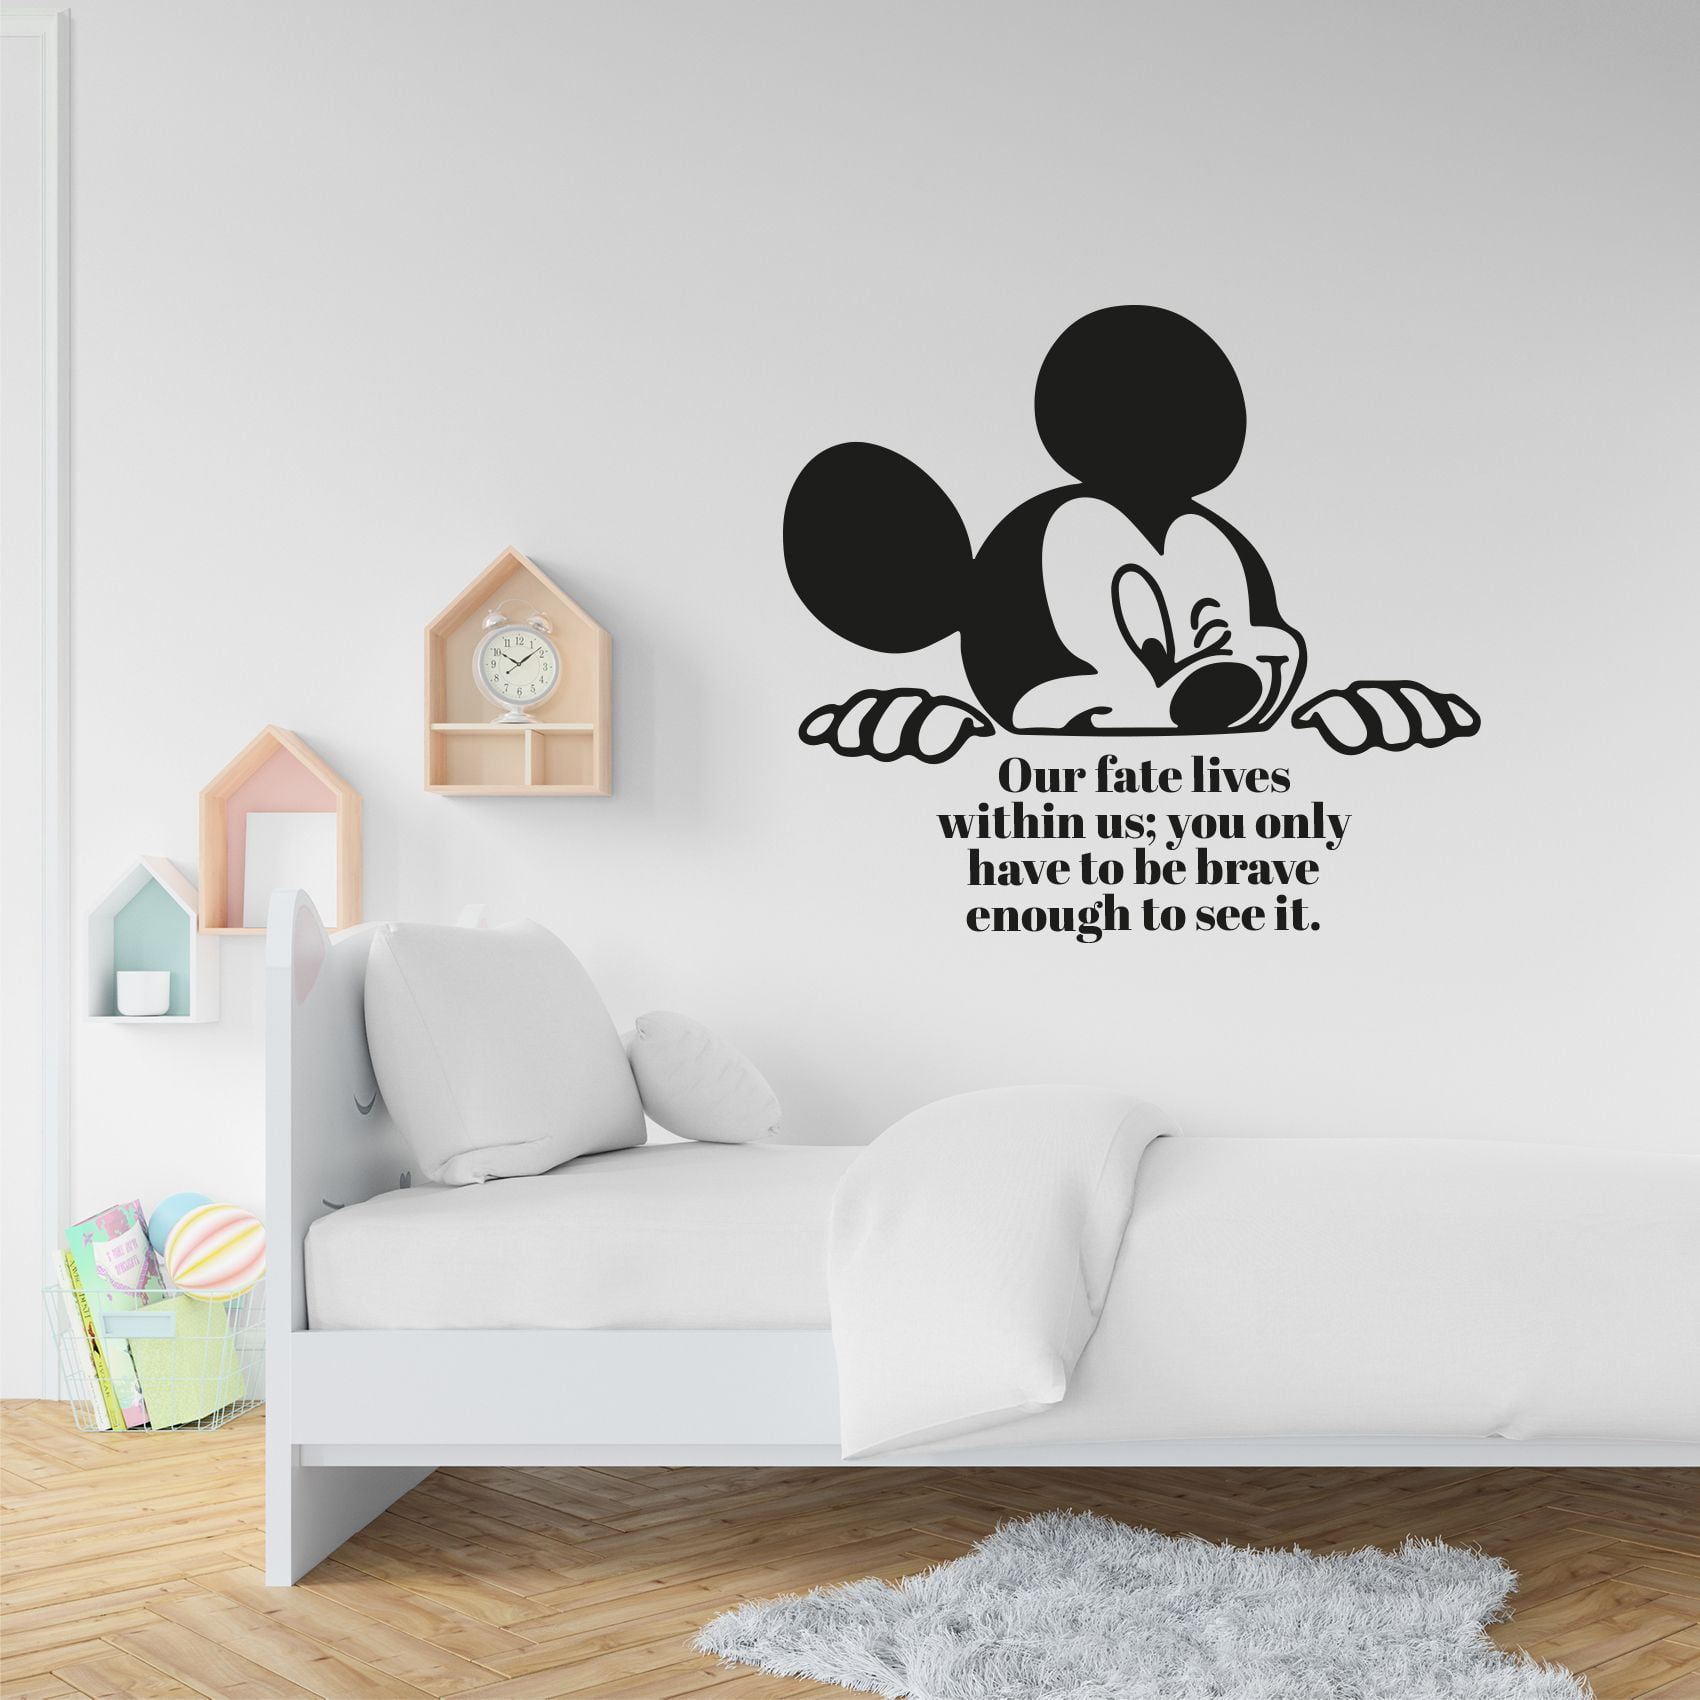 Mickey Mouse Decal  Disney Decal  Leader of the Club  Laptop Decal  Car Decal  Home Decor Decal